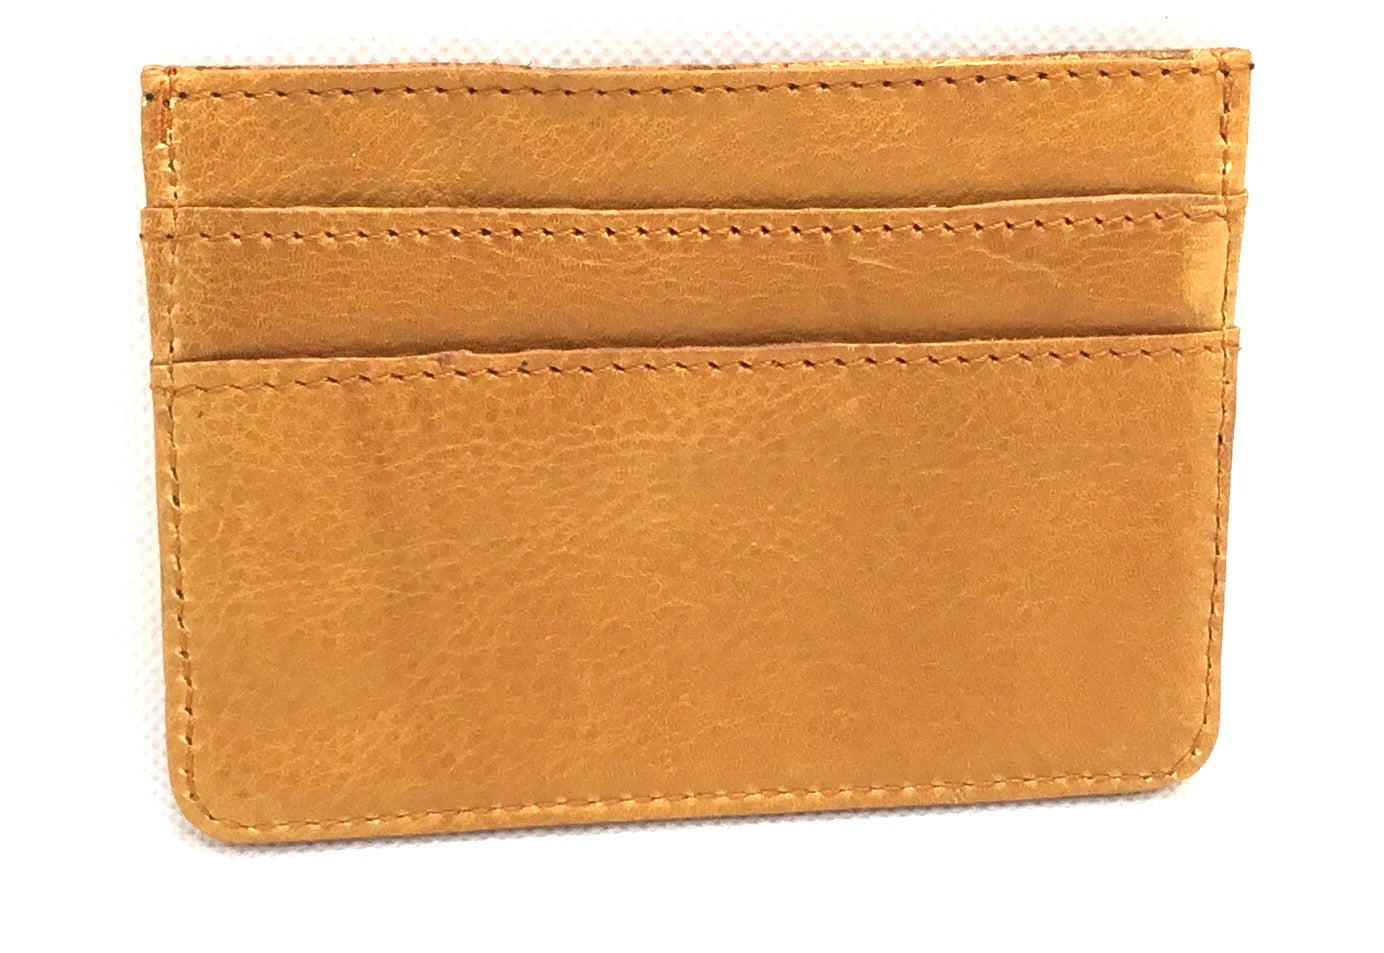 Cooper Allan Slime Credit Card Case in full grain  leather with 4 card slots and a section for notes in the middle.